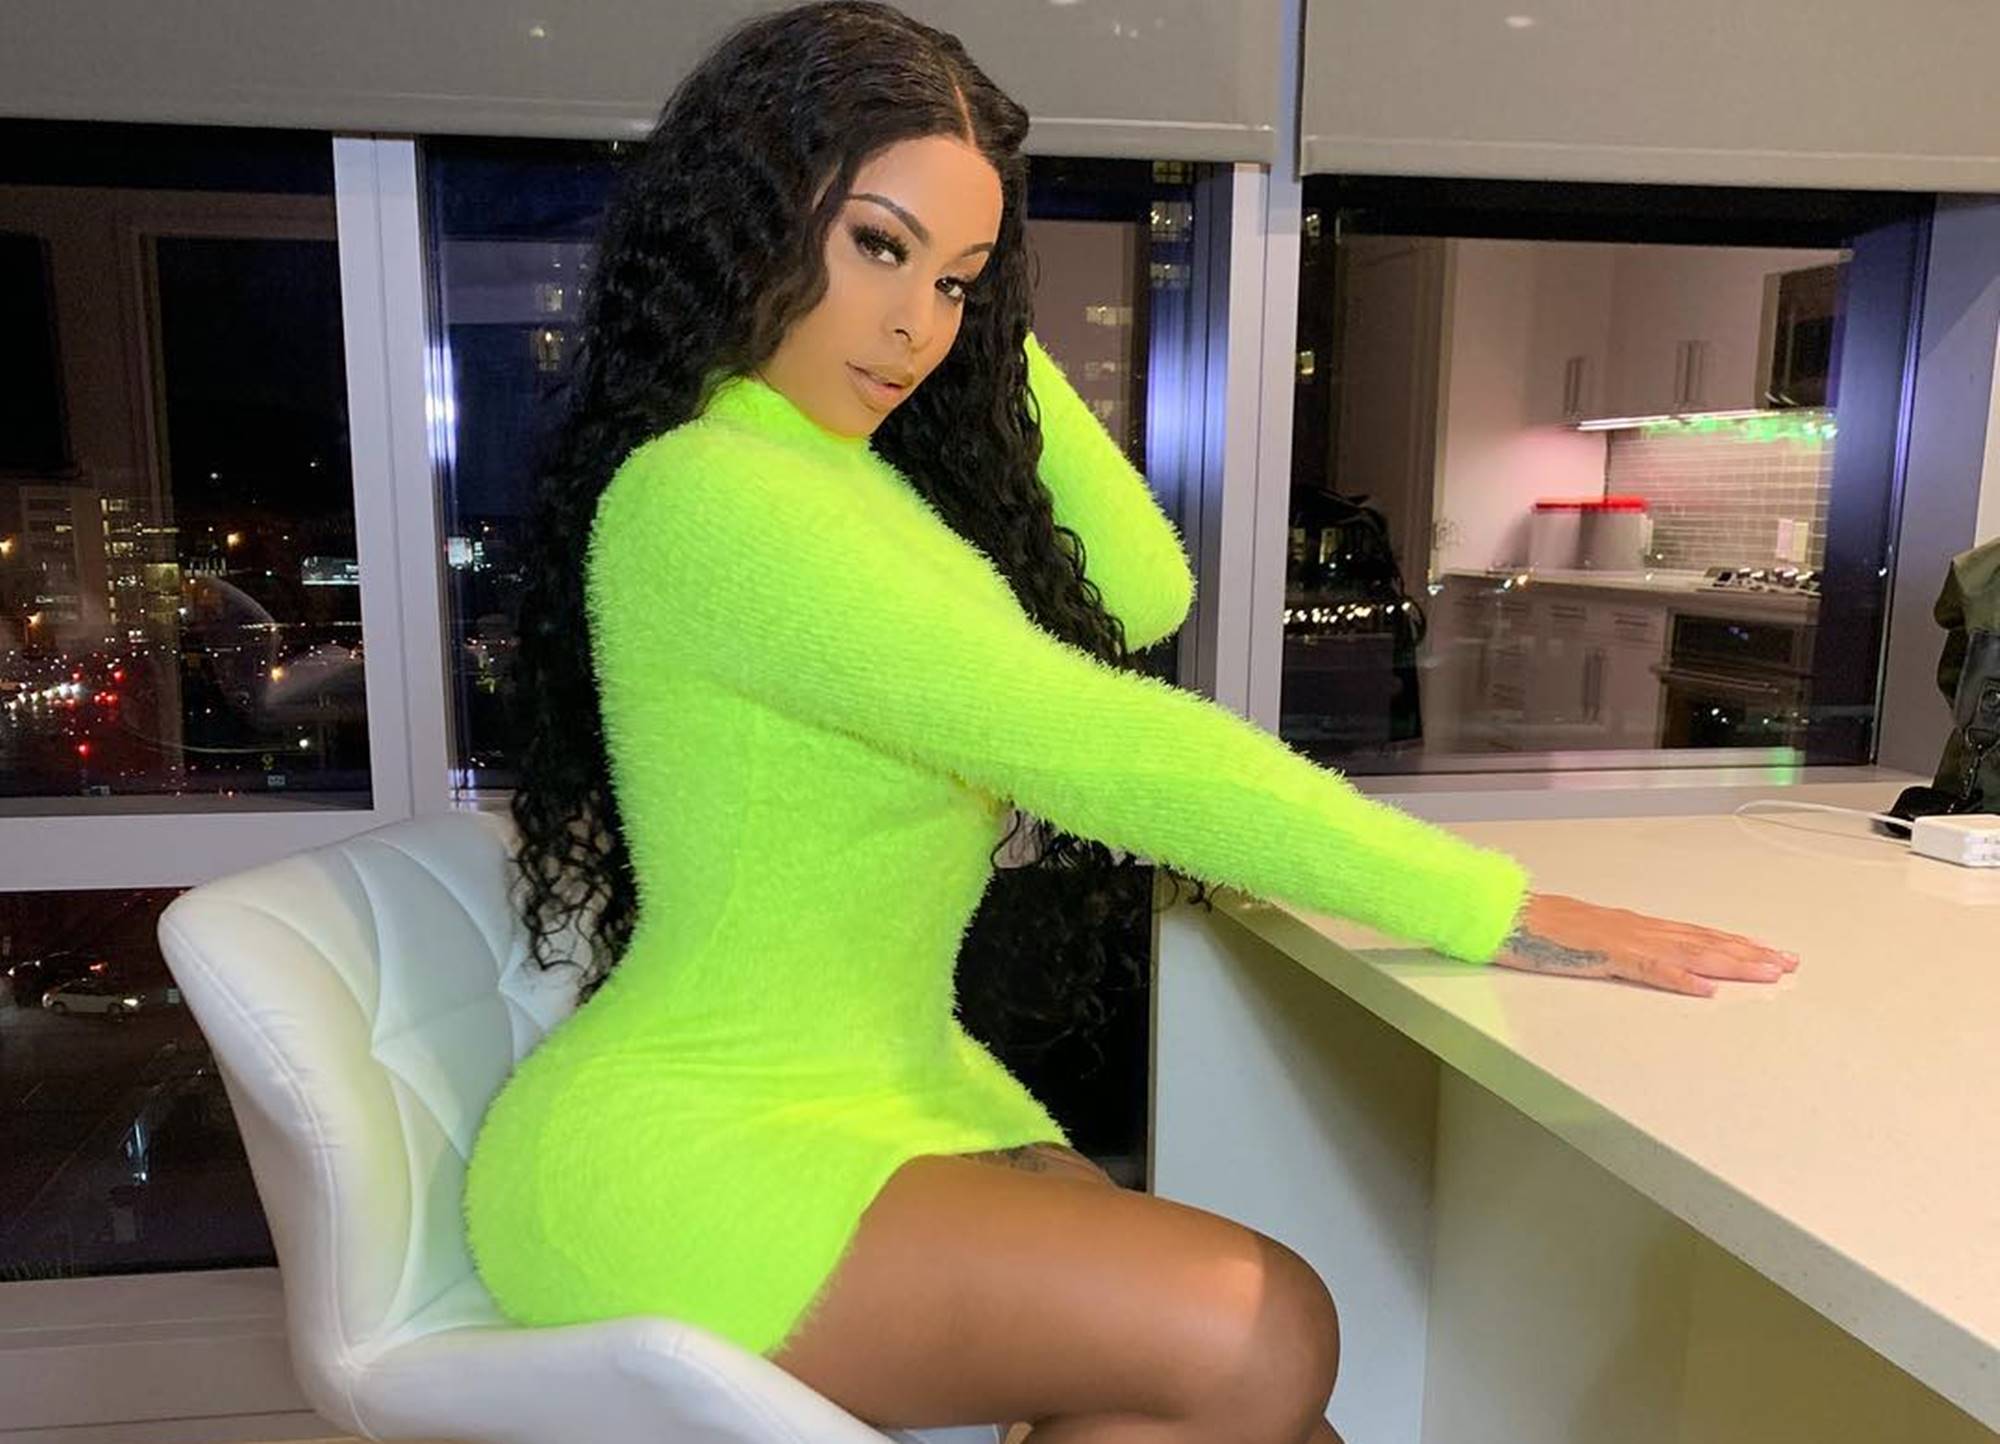 Rob Kardashian Is Dating Blac Chynas Nemesis Alexis Skyy Because He Is Bored Is The Kuwtk